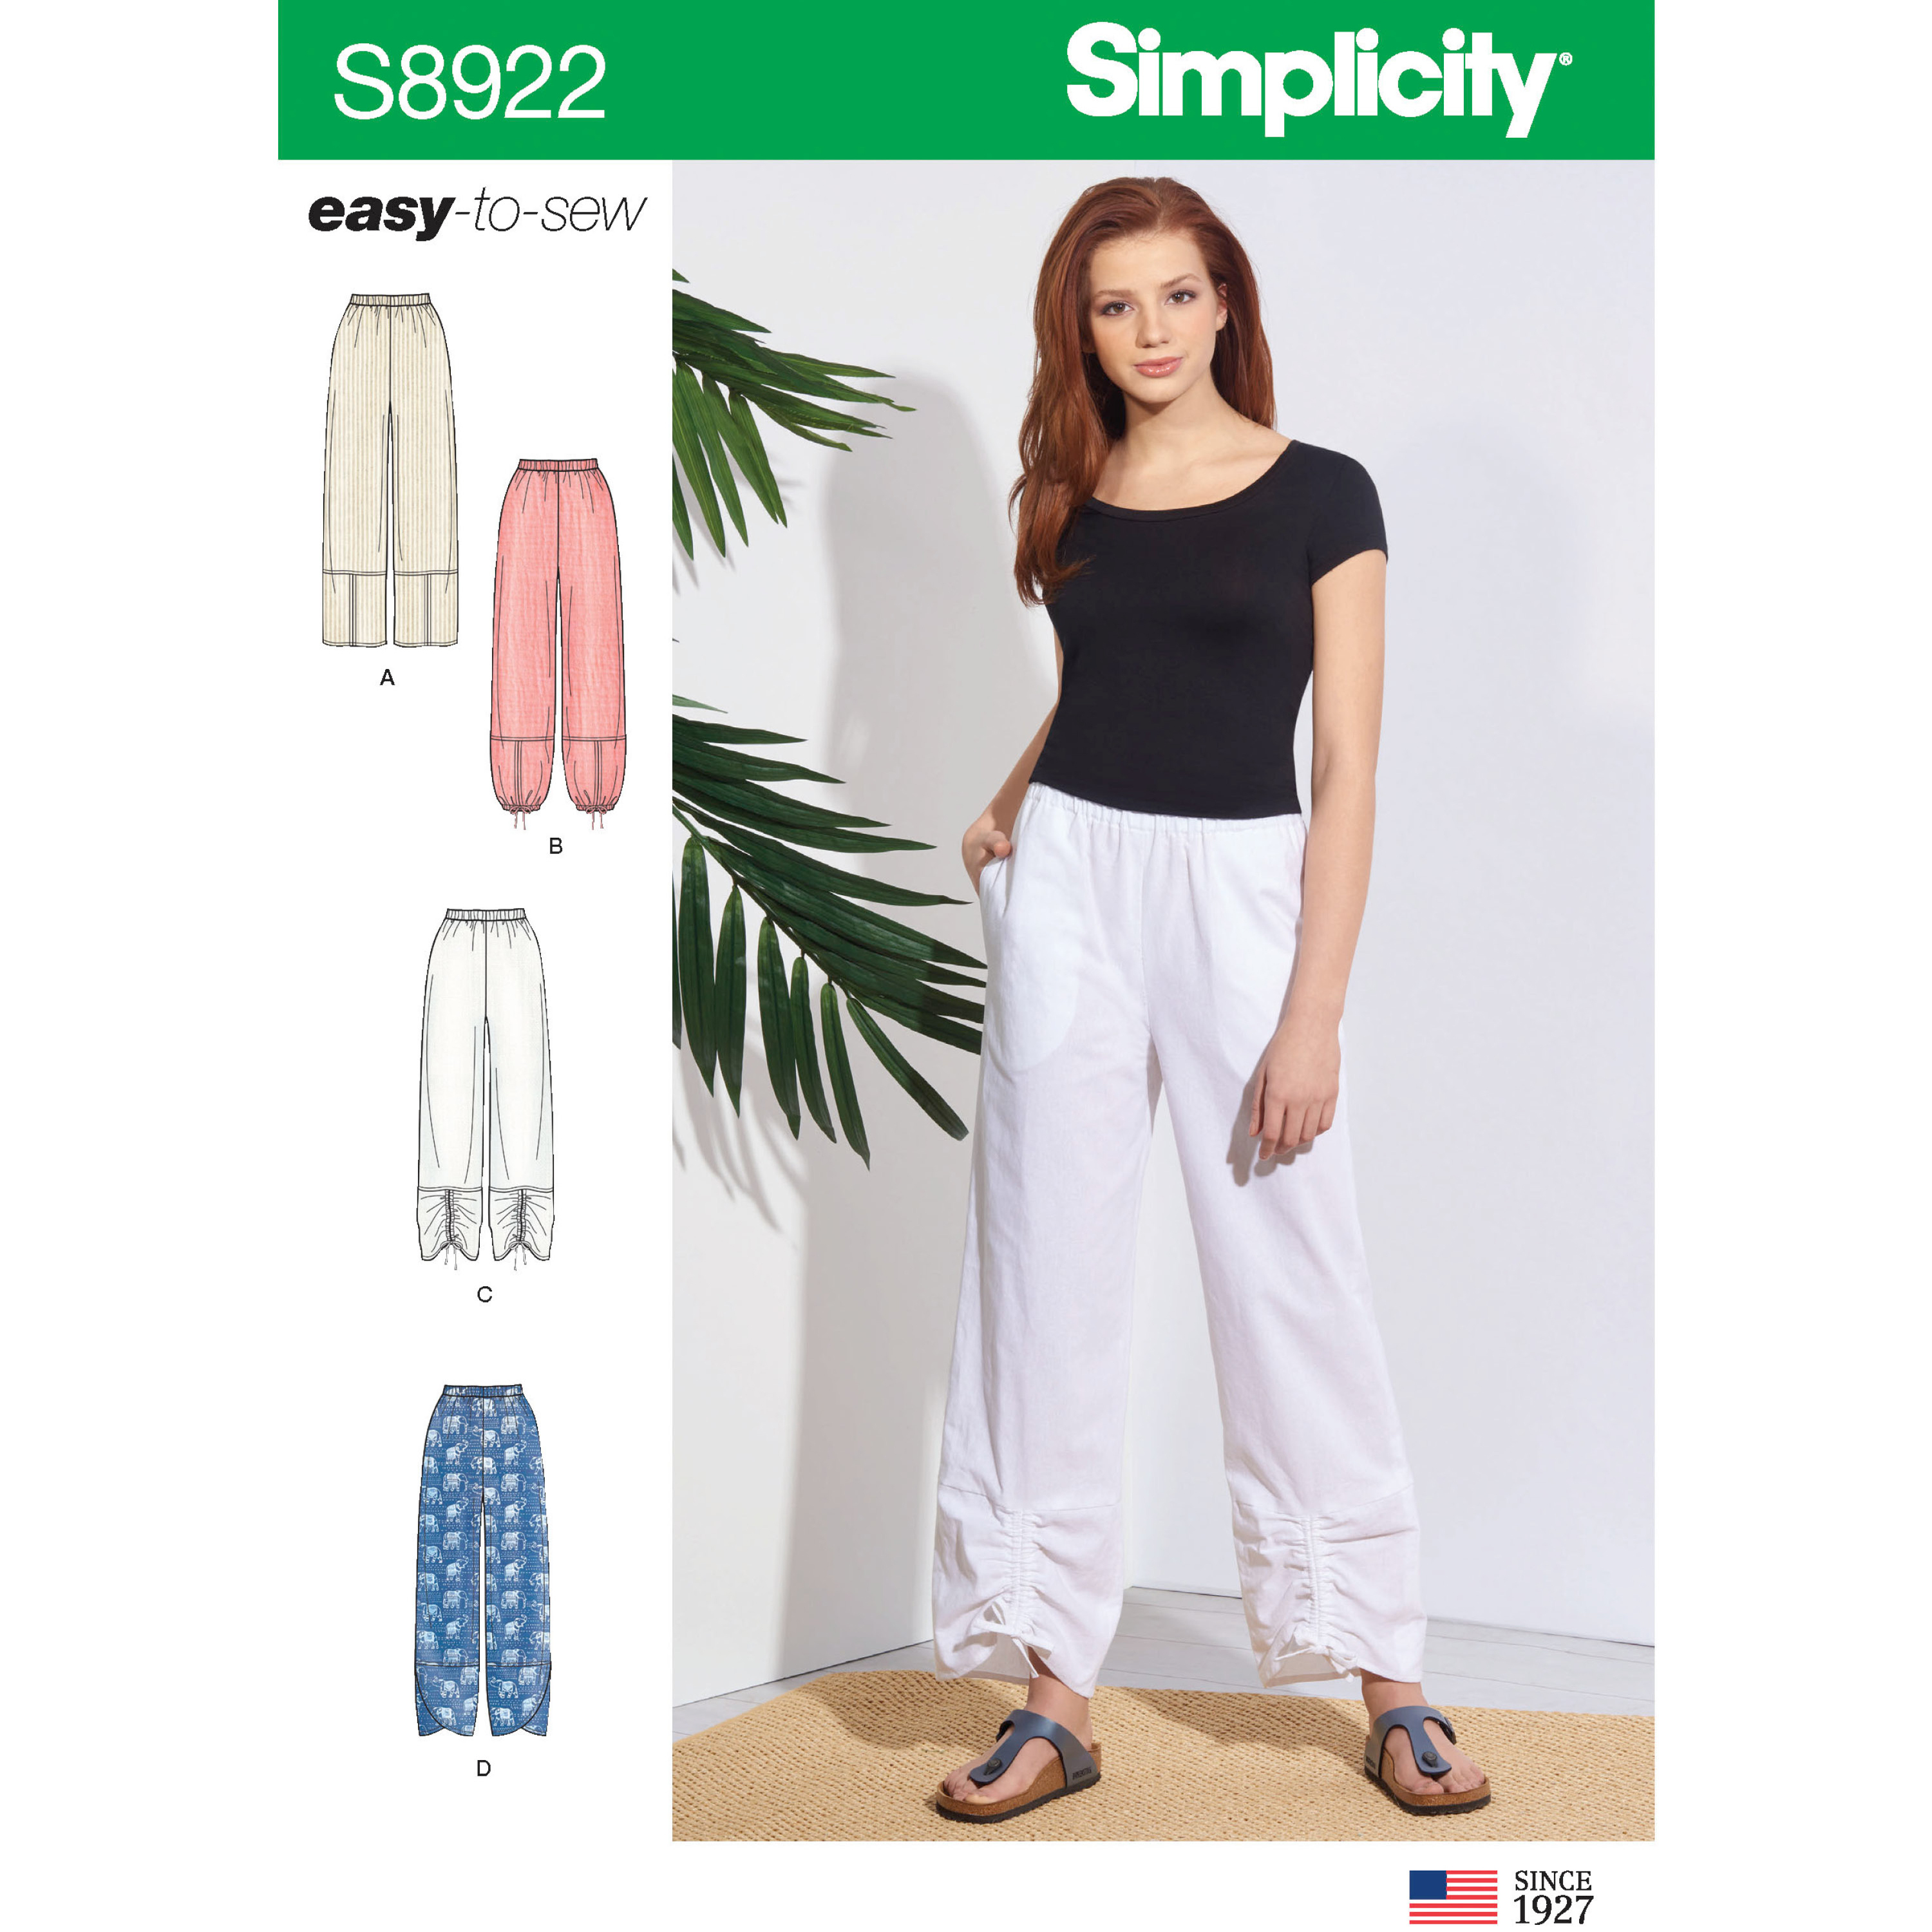 Simplicity 8212 Sewing Pattern | Remnant House Fabric